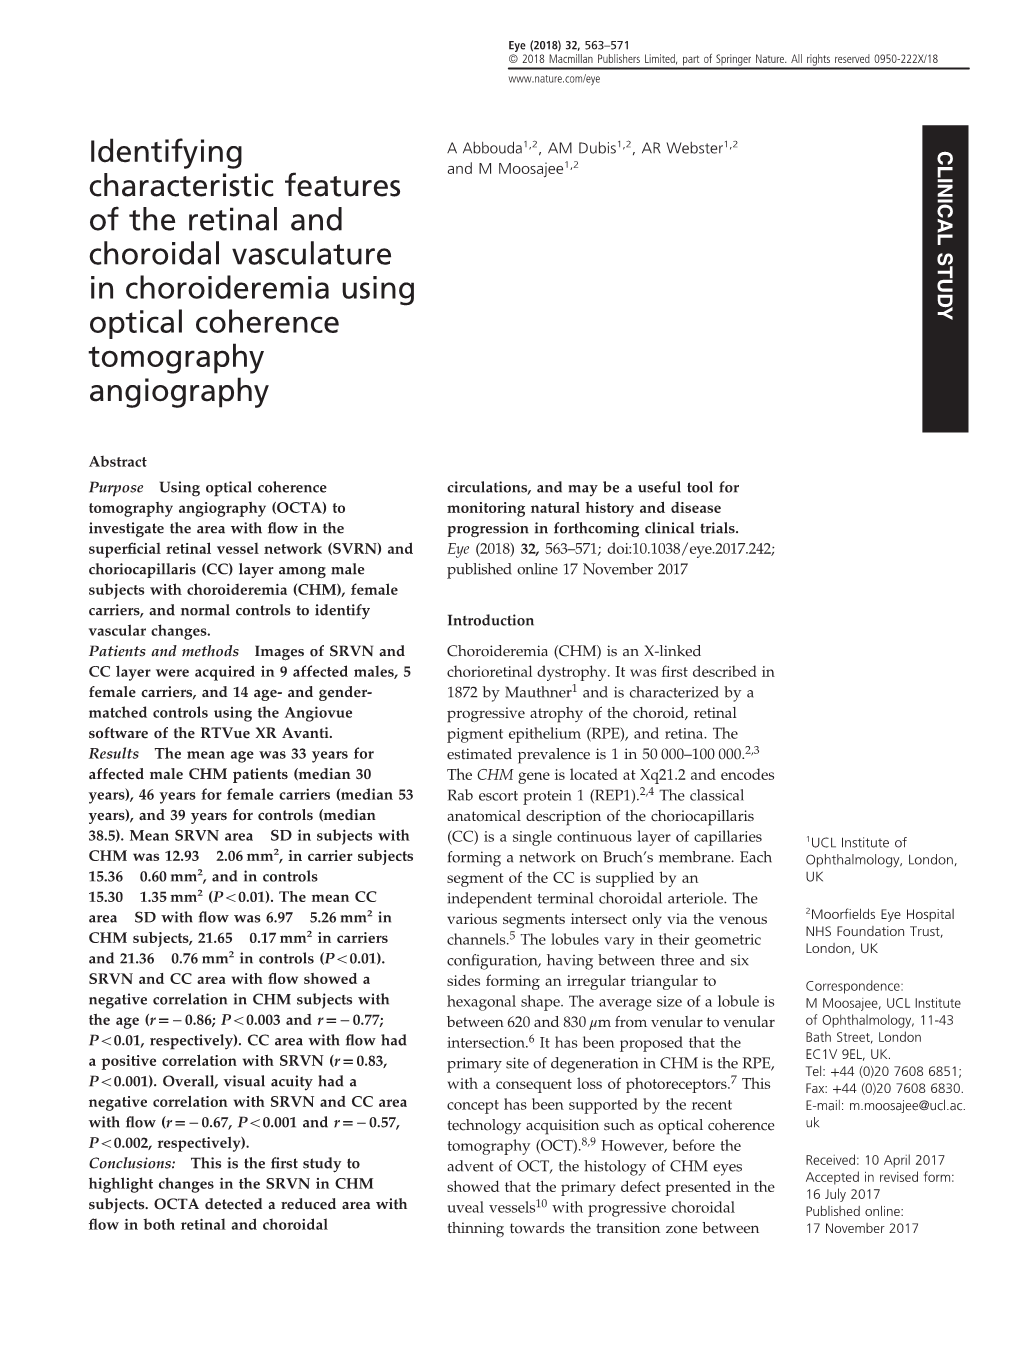 Identifying Characteristic Features of the Retinal and Choroidal